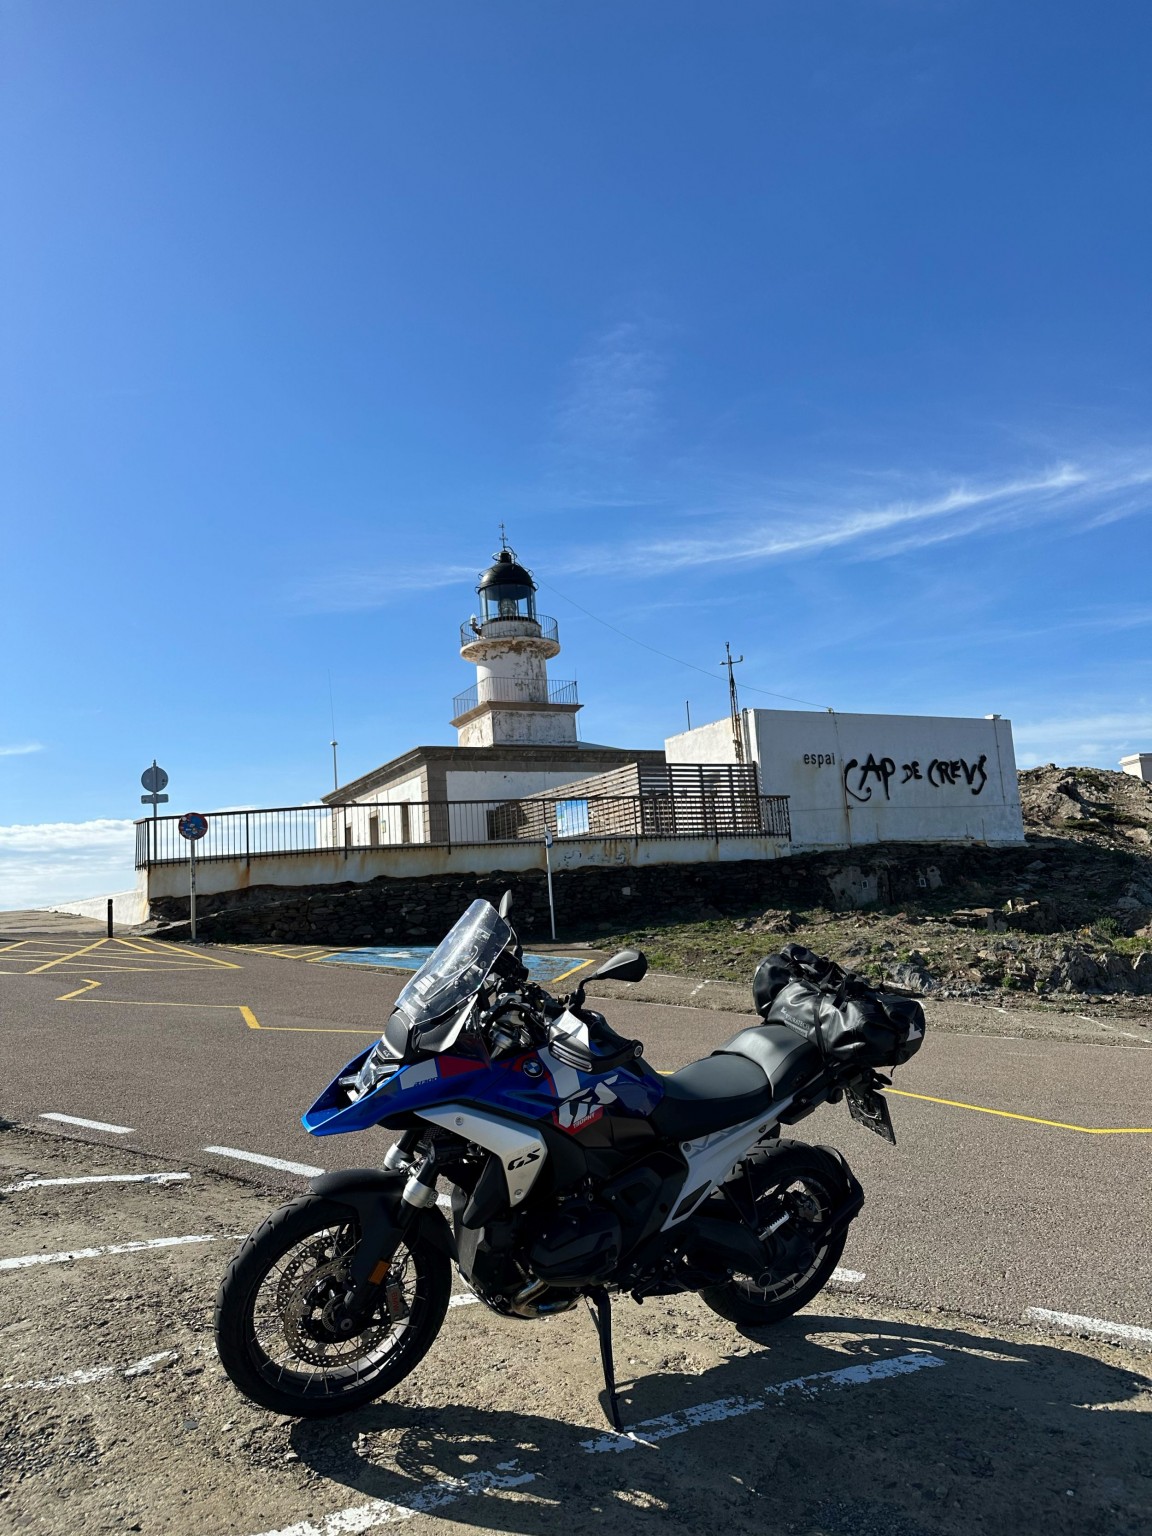 BMW R 1300 GS road test - from Barcelona to Vienna - Image 19